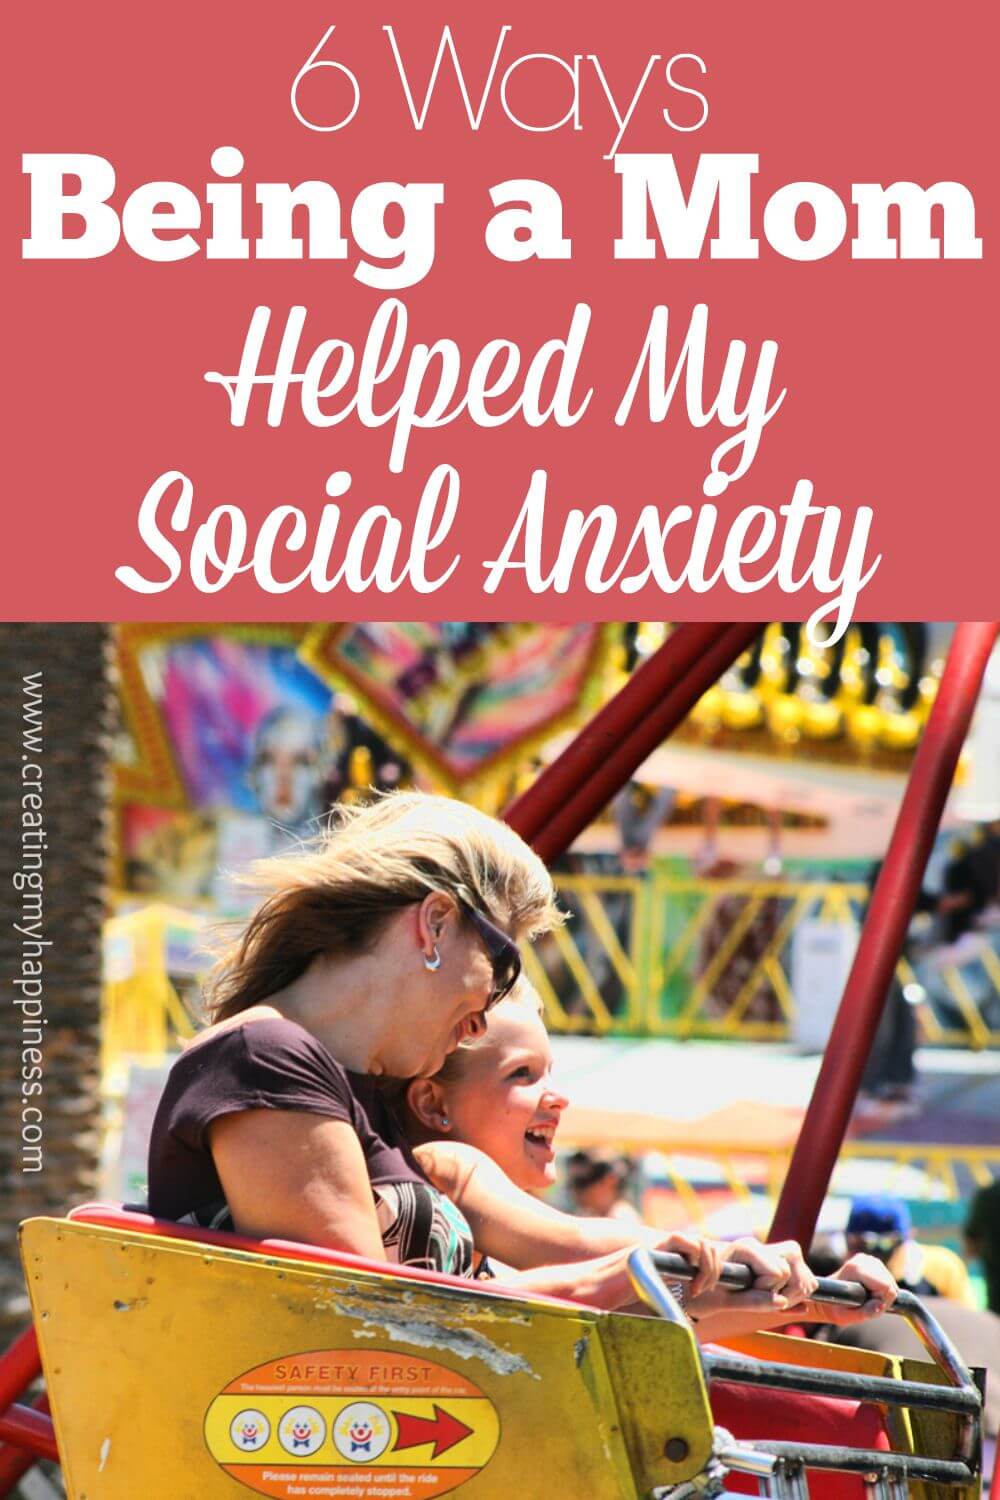 In many ways being a parent can feed the isolation caused by social anxiety. But it can also help you grow in ways you never thought possible.